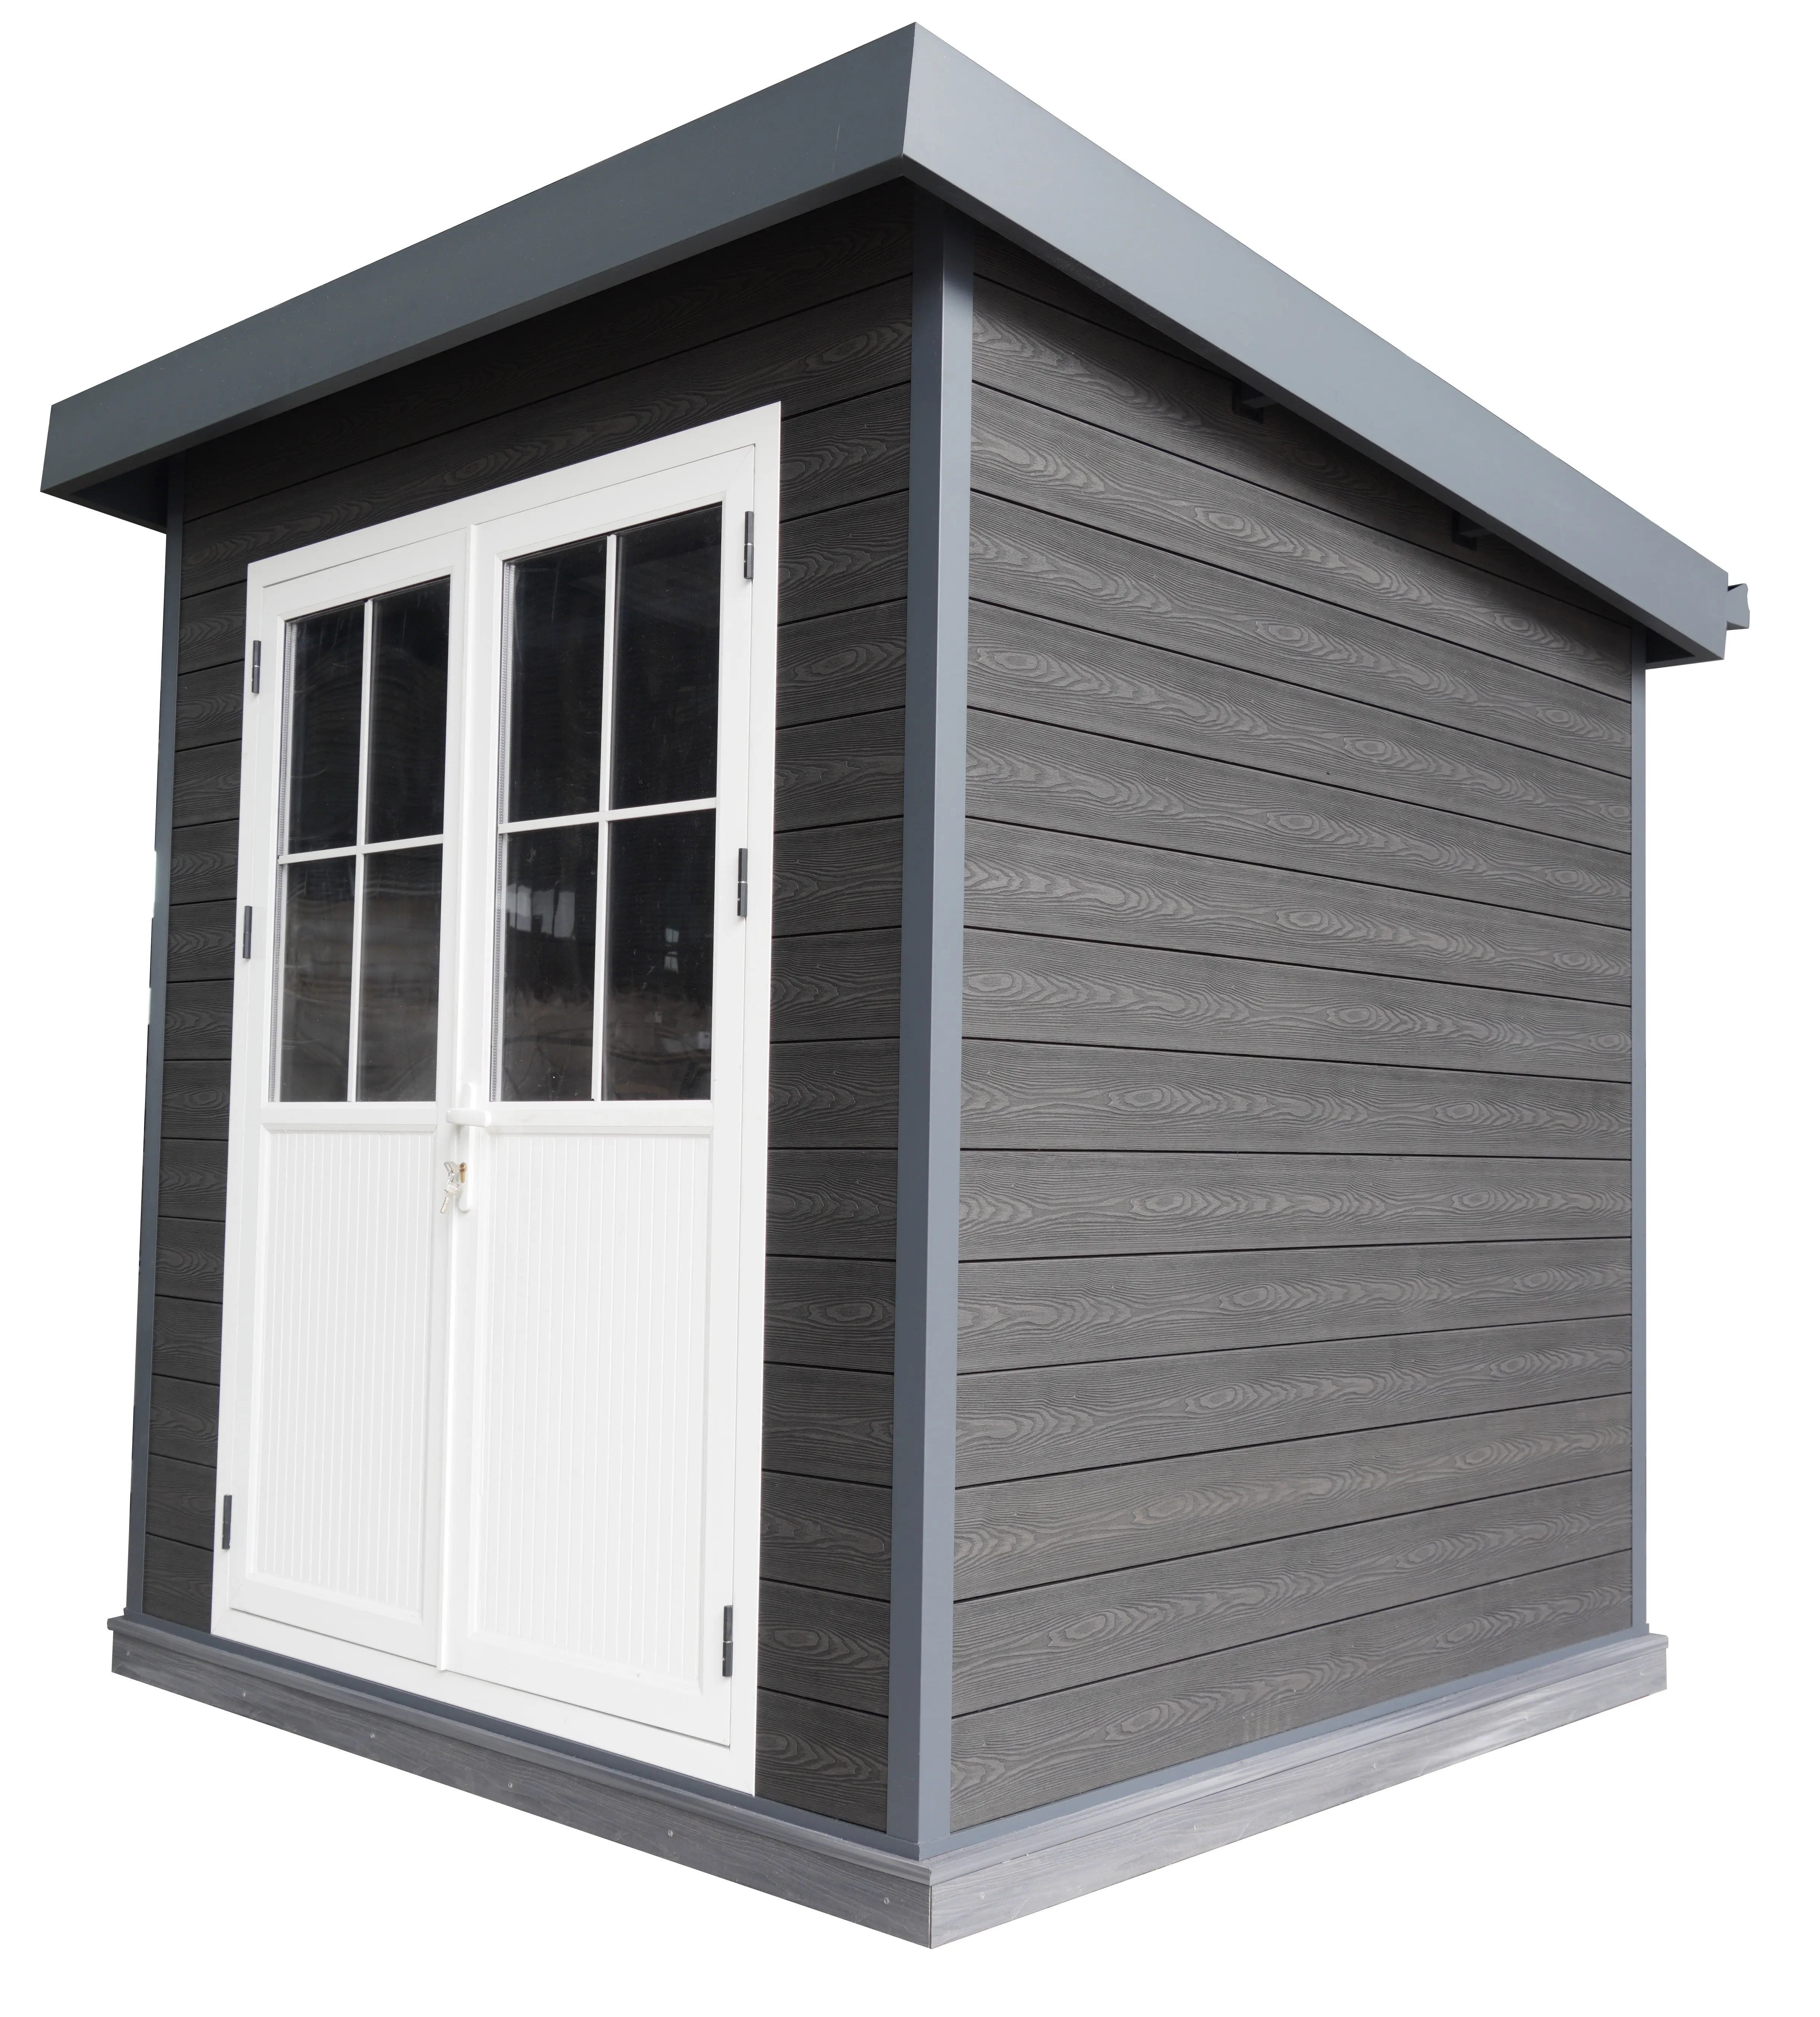 XINDAI Garage and Storage Room Aluminium shed tool house WPC Garden Shed